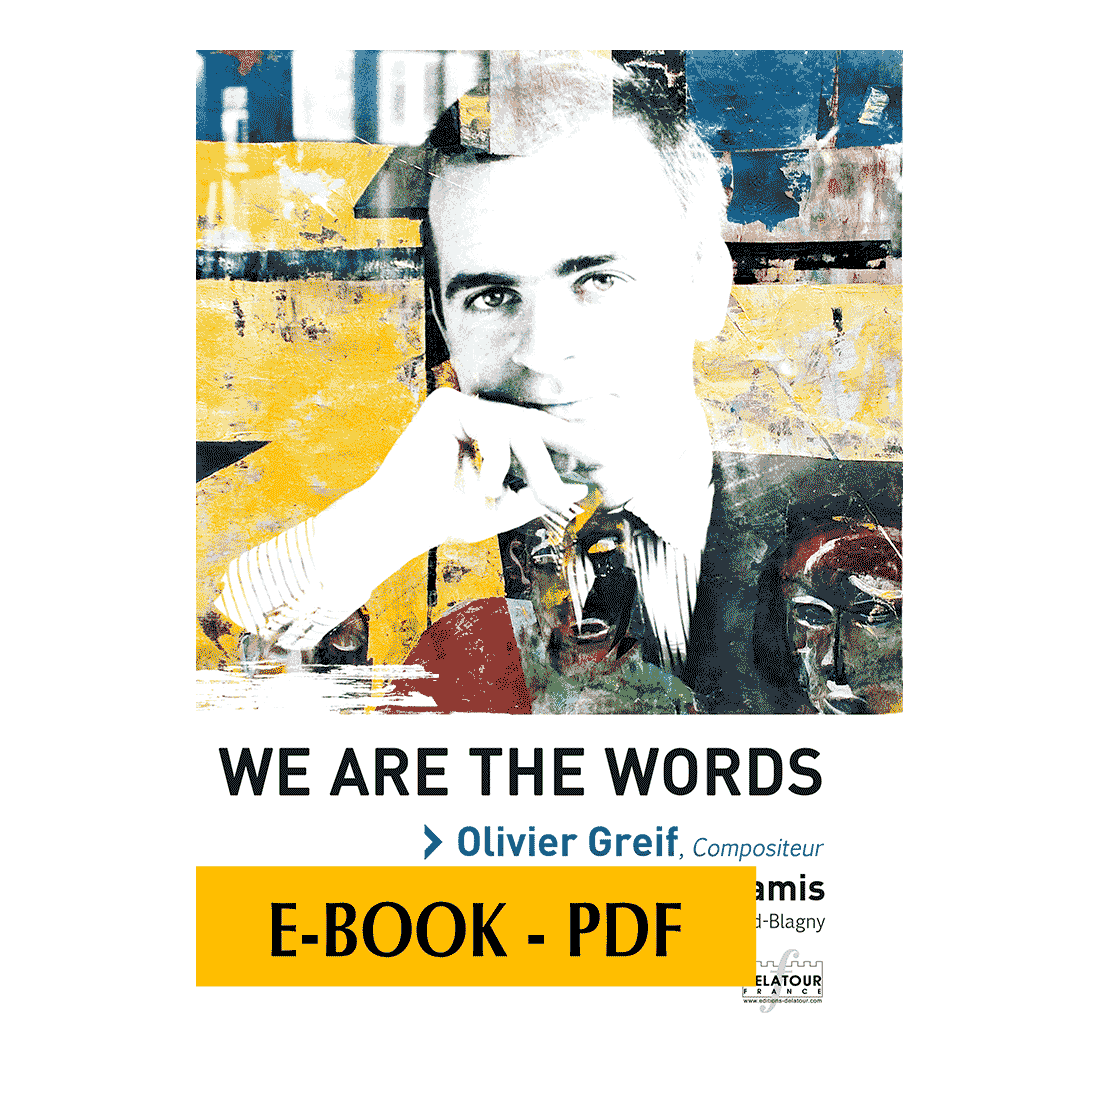 We are the words - Olivier Greif, compositeur - E-book PDF